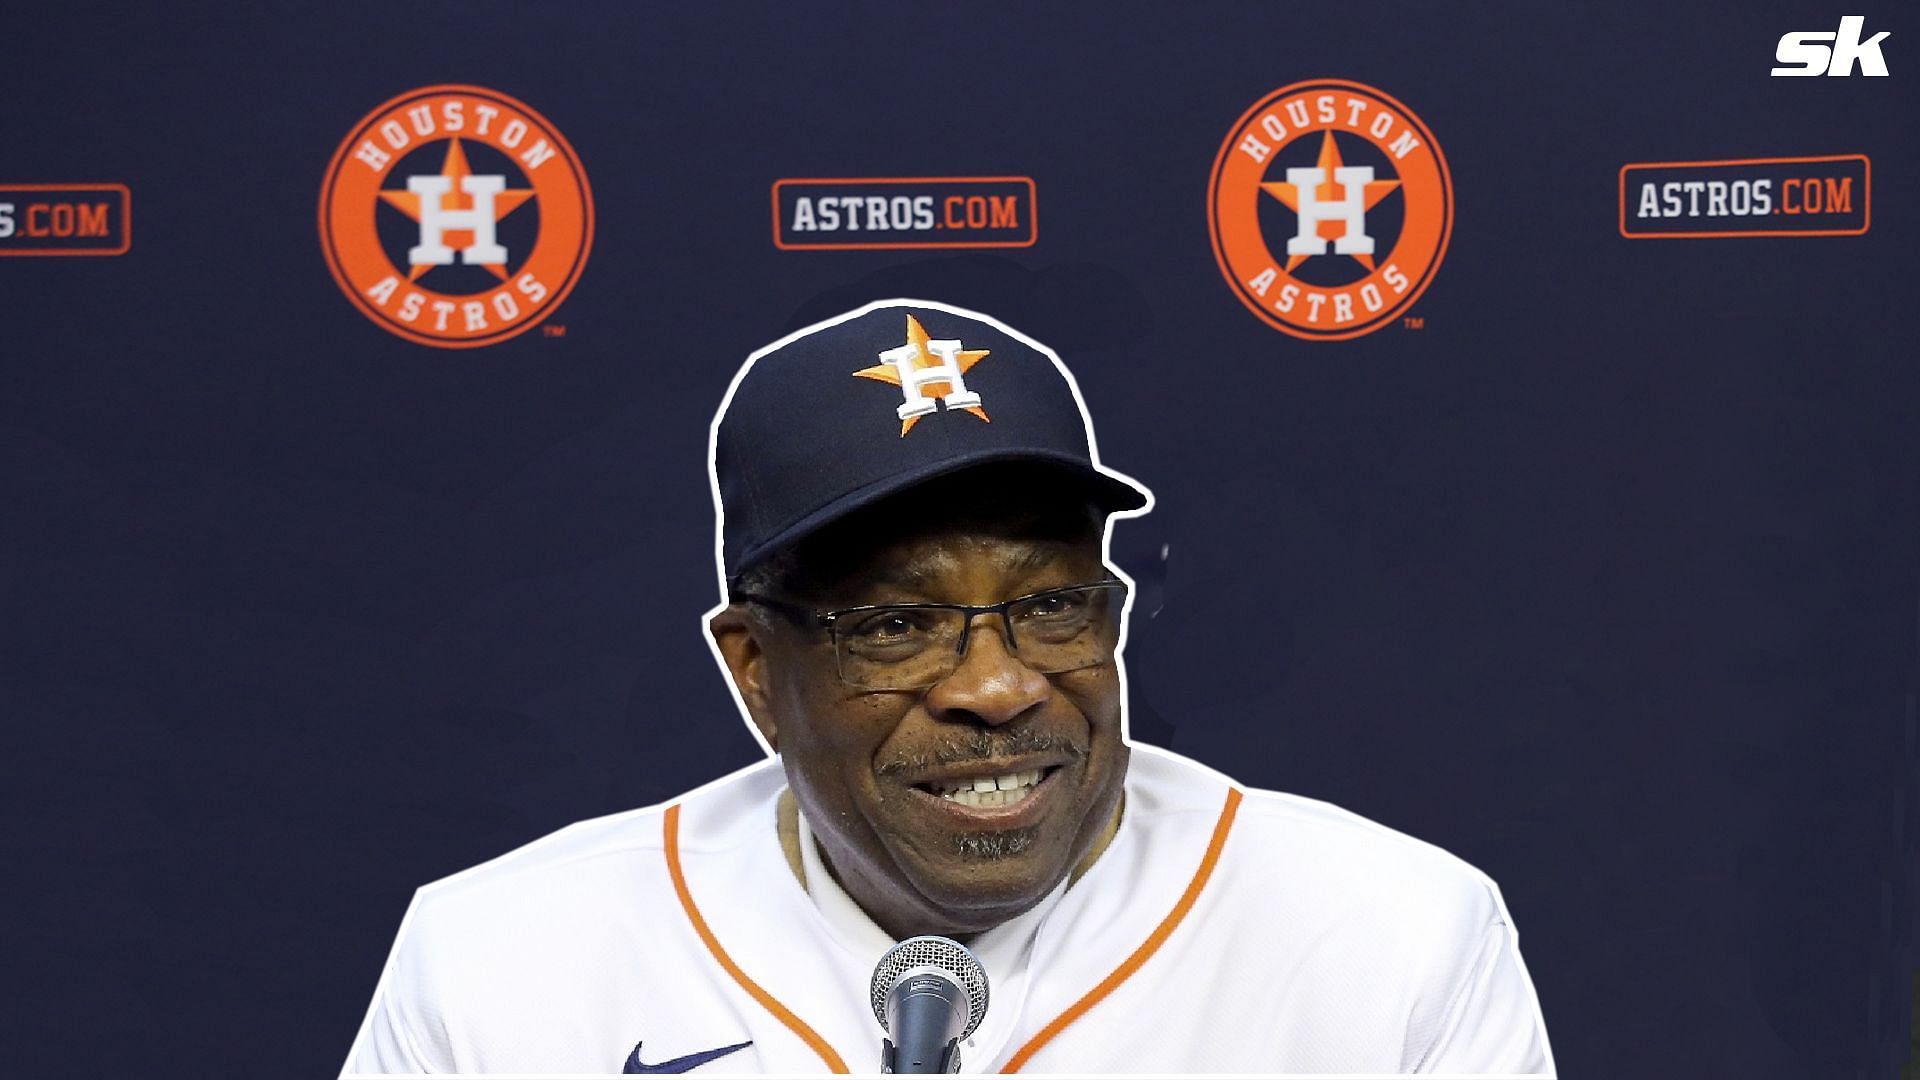 The Houston Astros held a retirement press conference for Dusty Baker on Thursday at Minute Maid Park